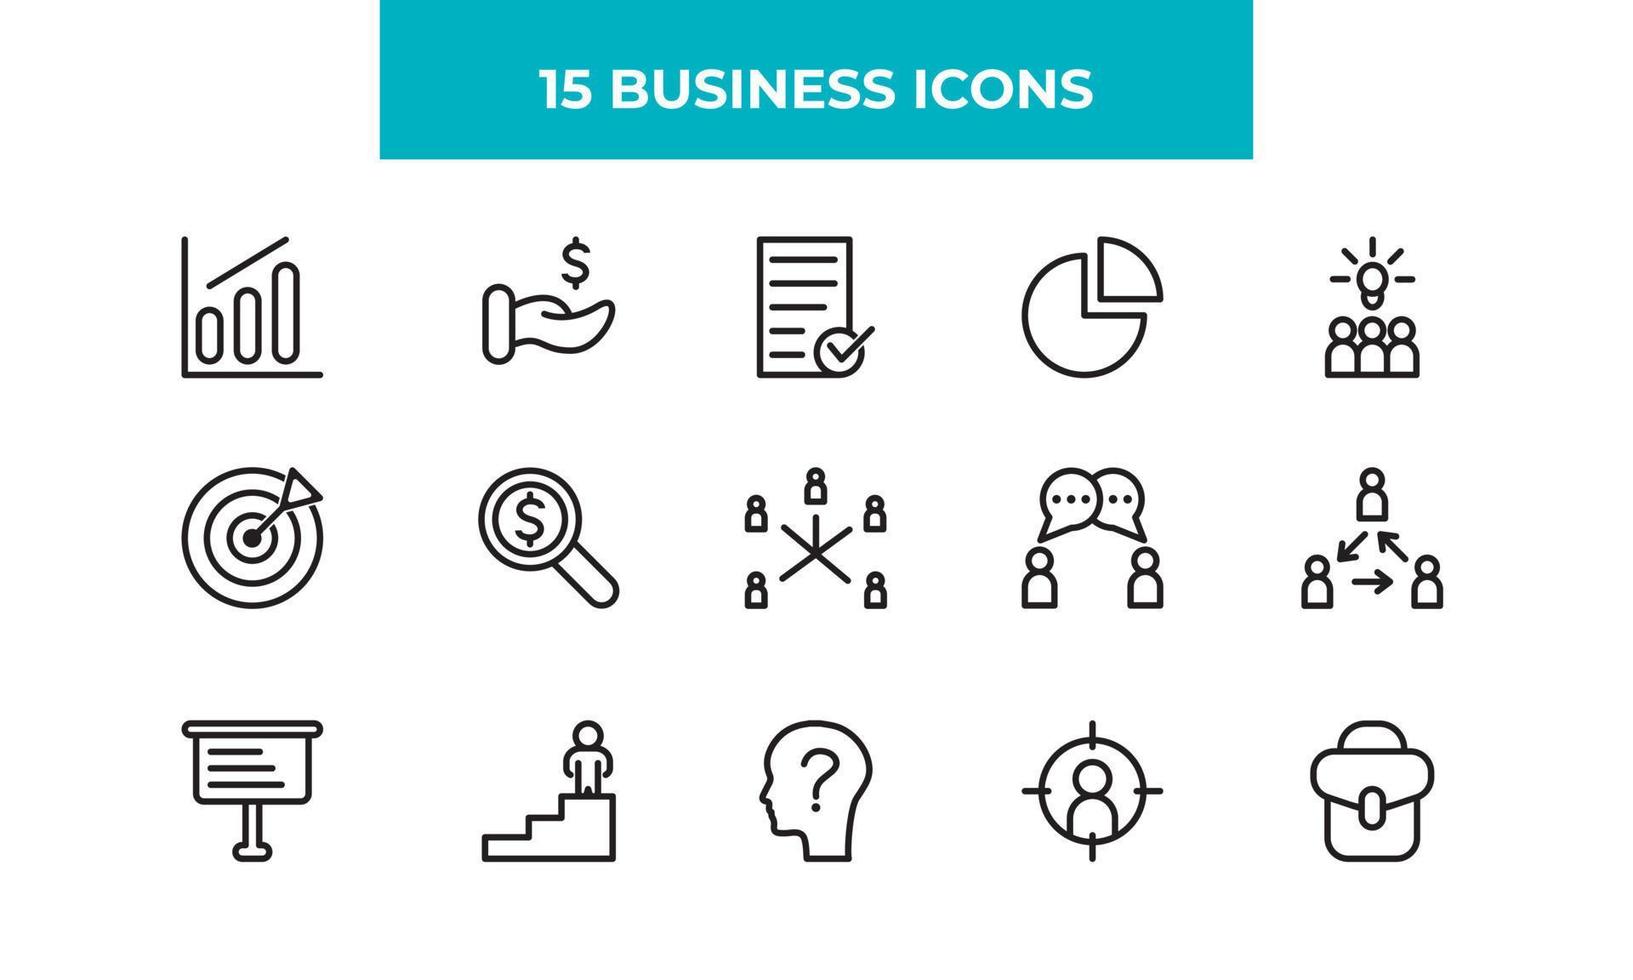 Set about business Related Vector Line Icons. Contains Icons like teamwork and more.